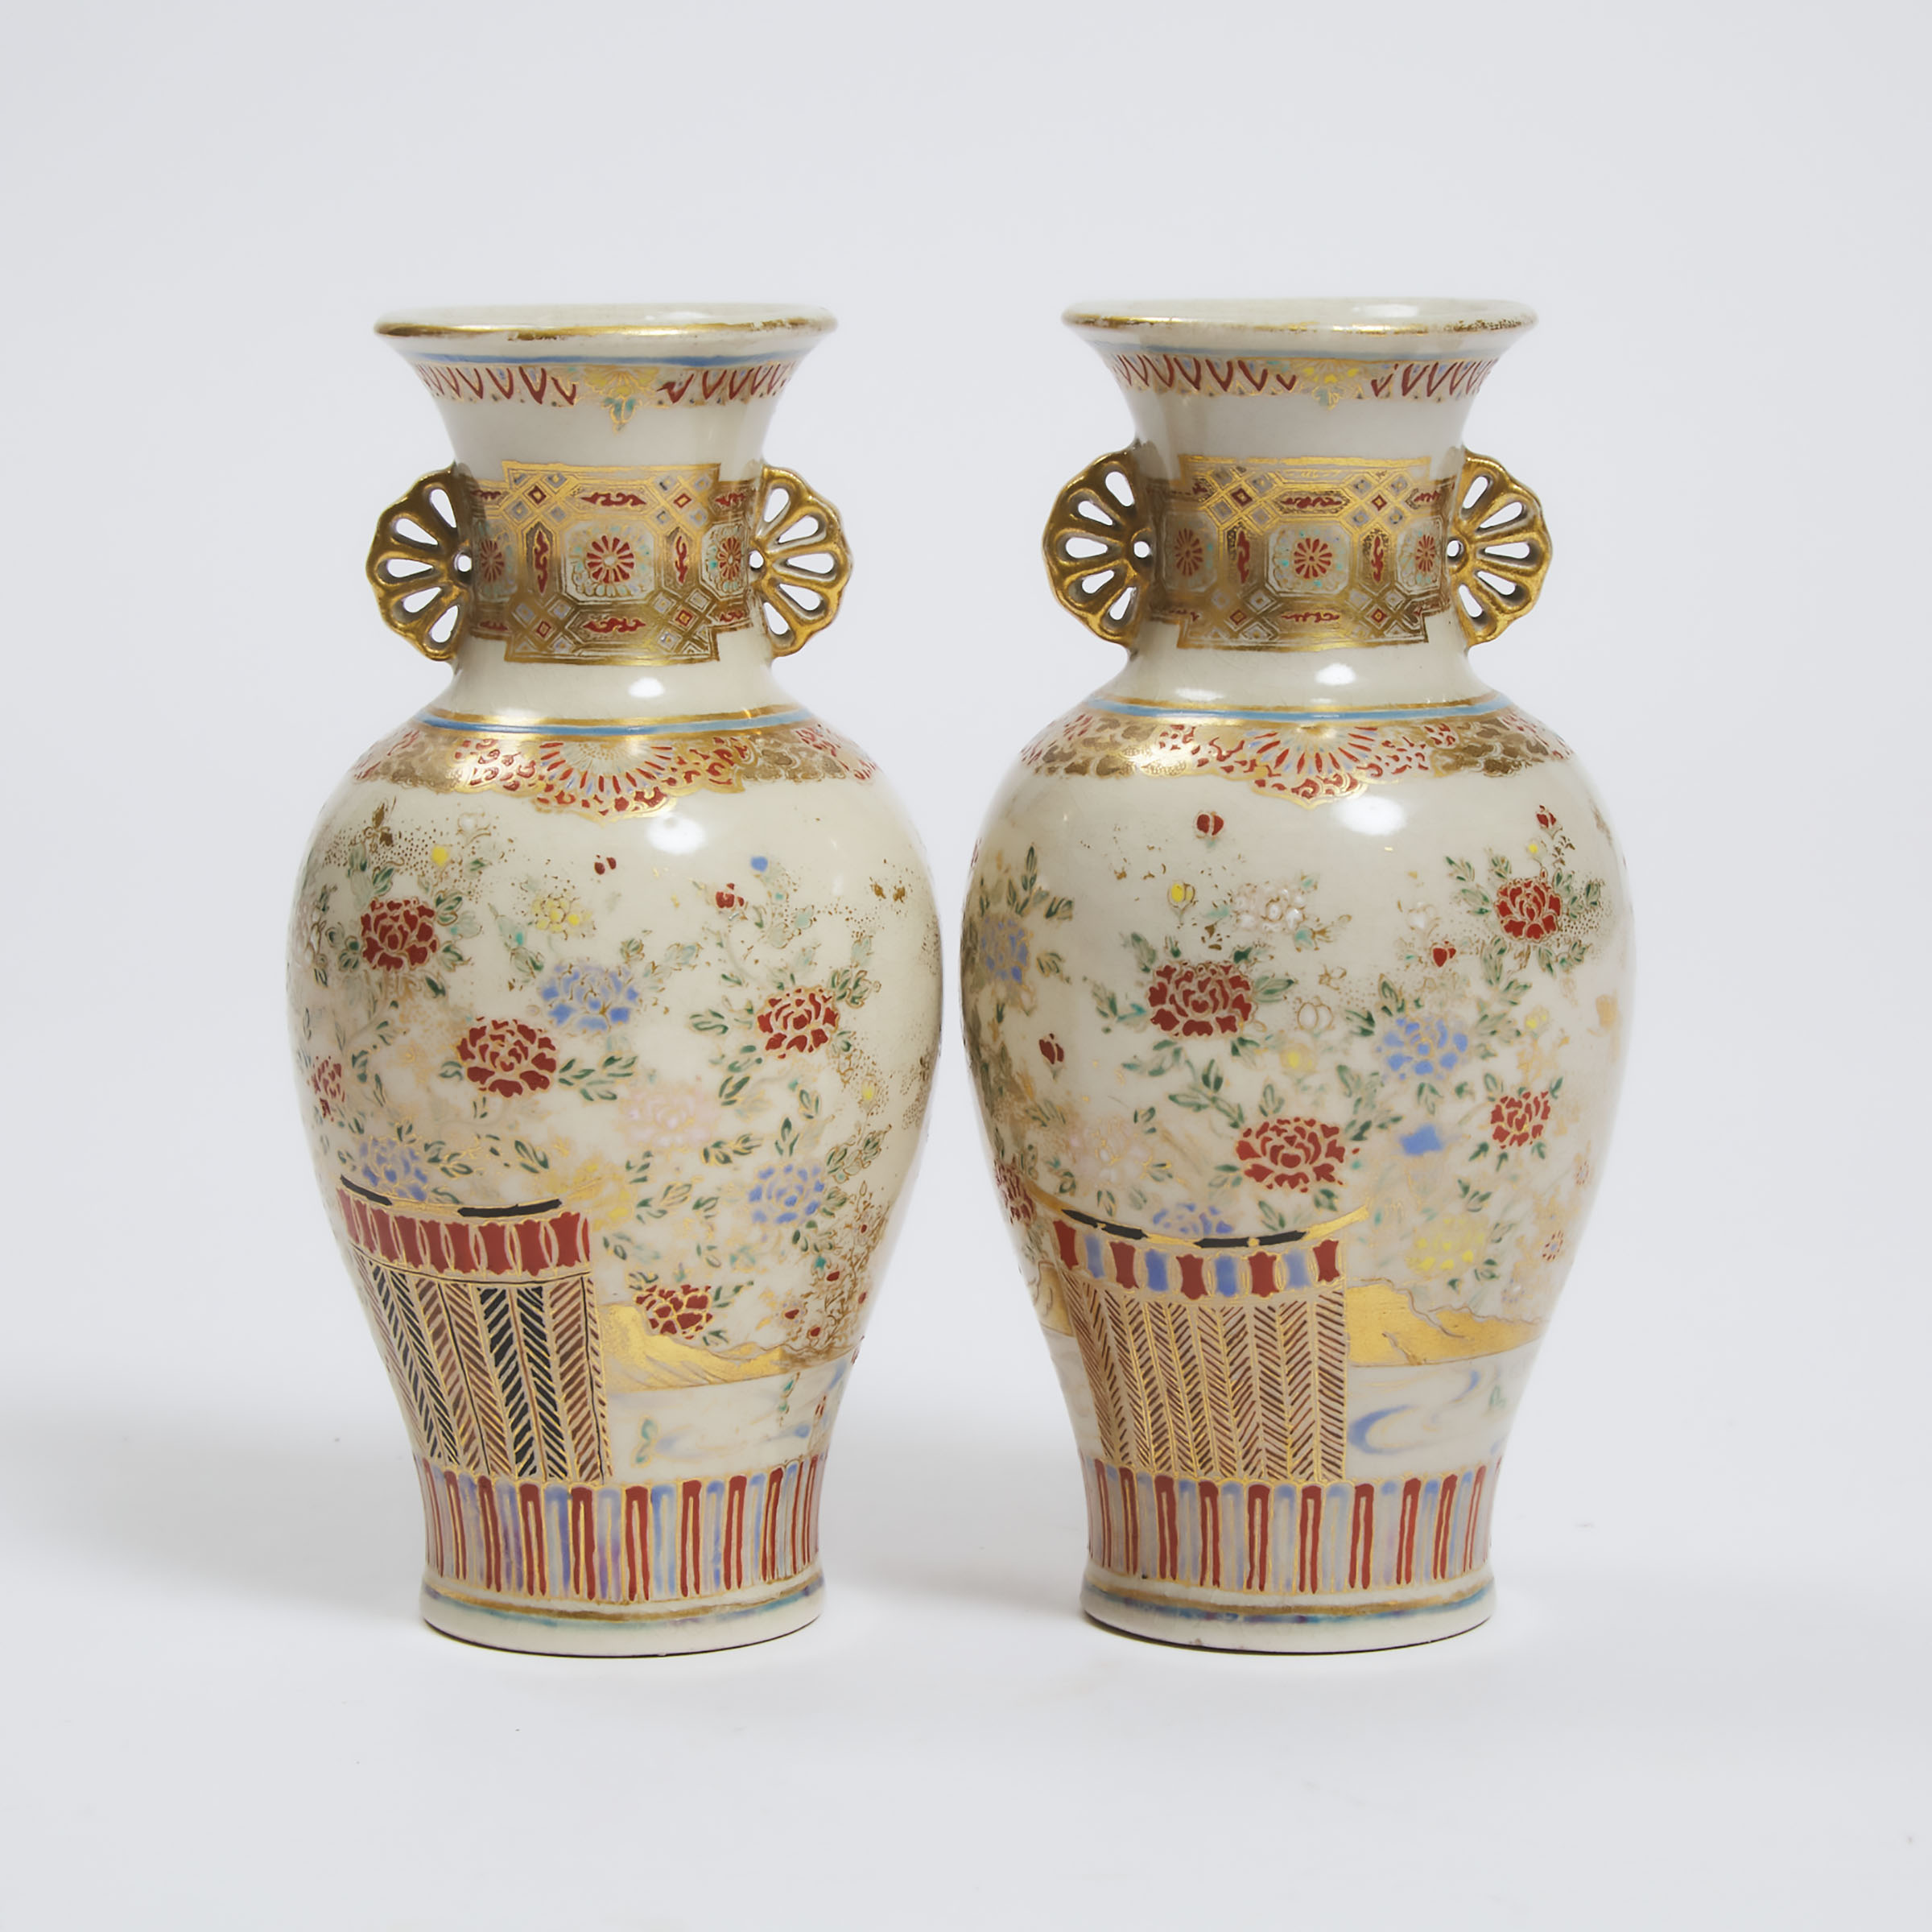 A Pair of Small Satsuma Vases, Meiji Period, height 5.9 in — 15 cm (2 Pieces) - Image 2 of 3